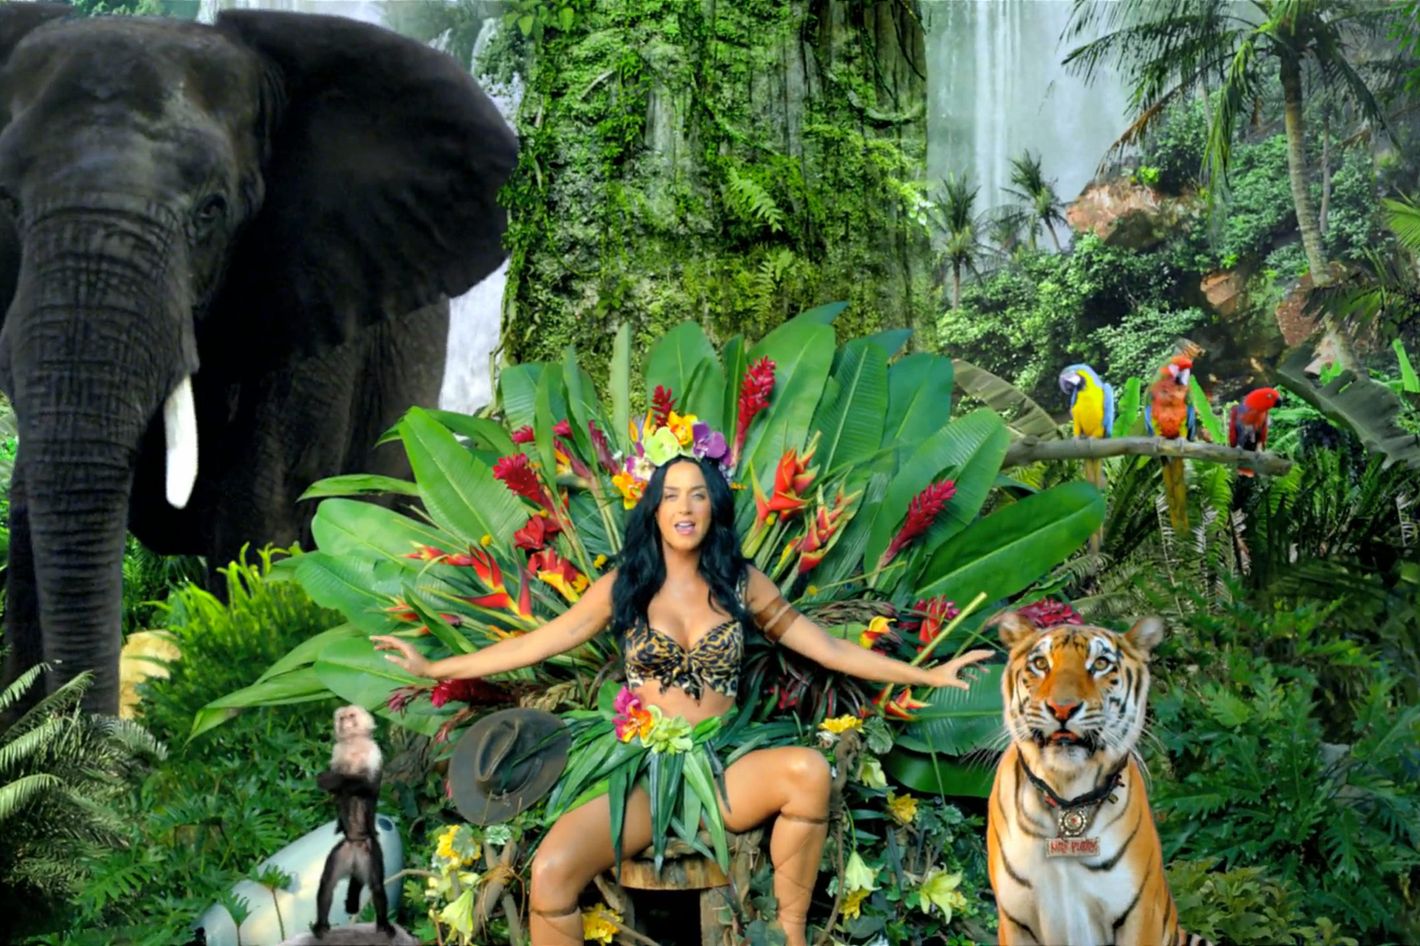 Roar Song by Katy Perry